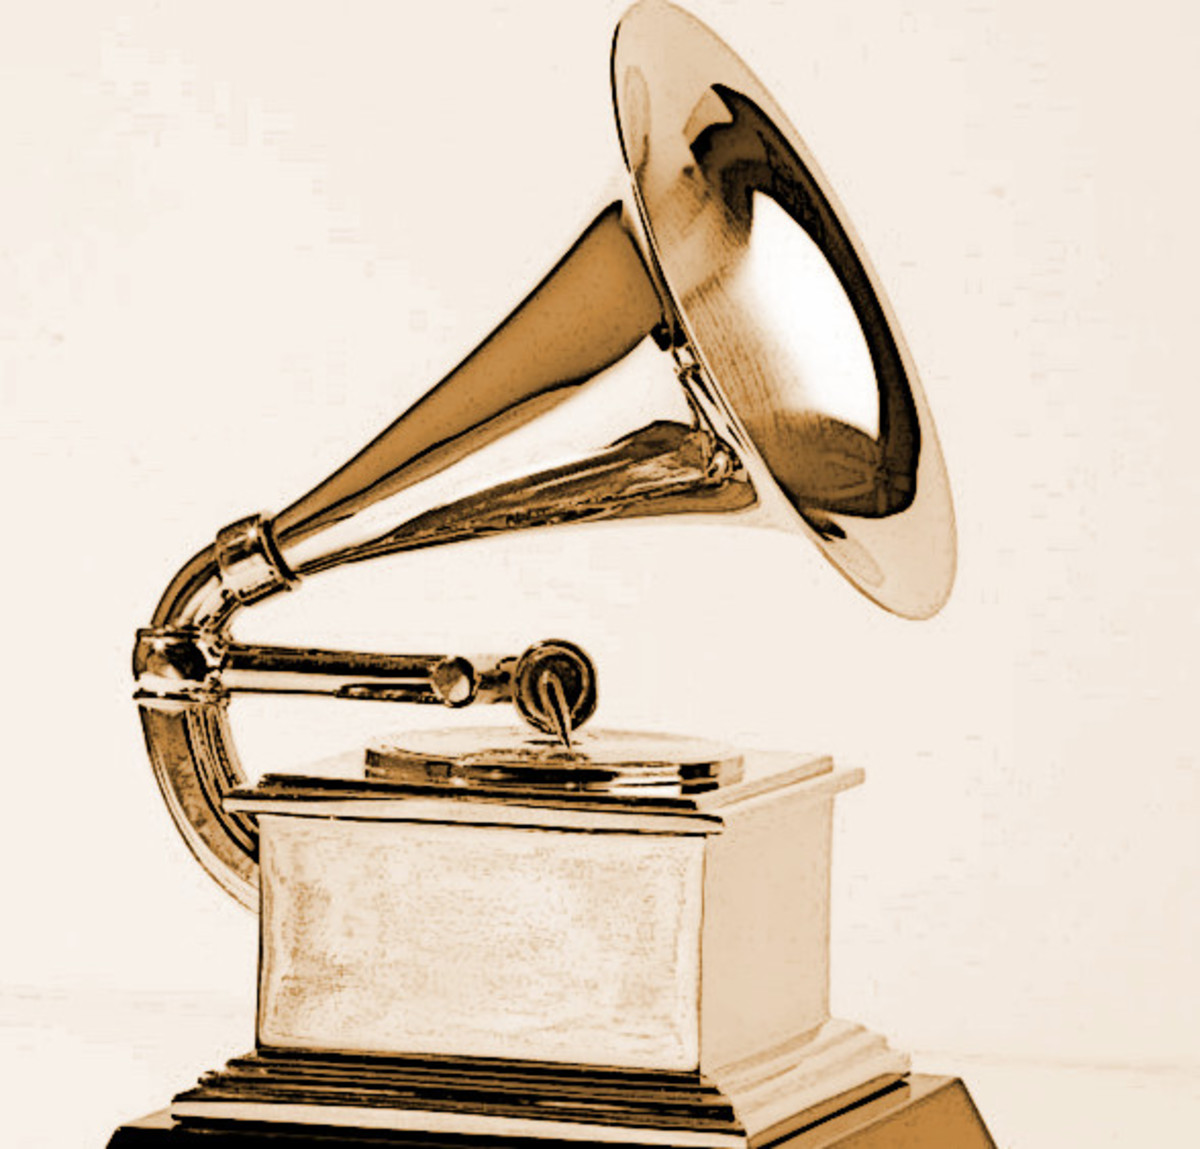 Are the Grammy Awards Really About Quality Music?